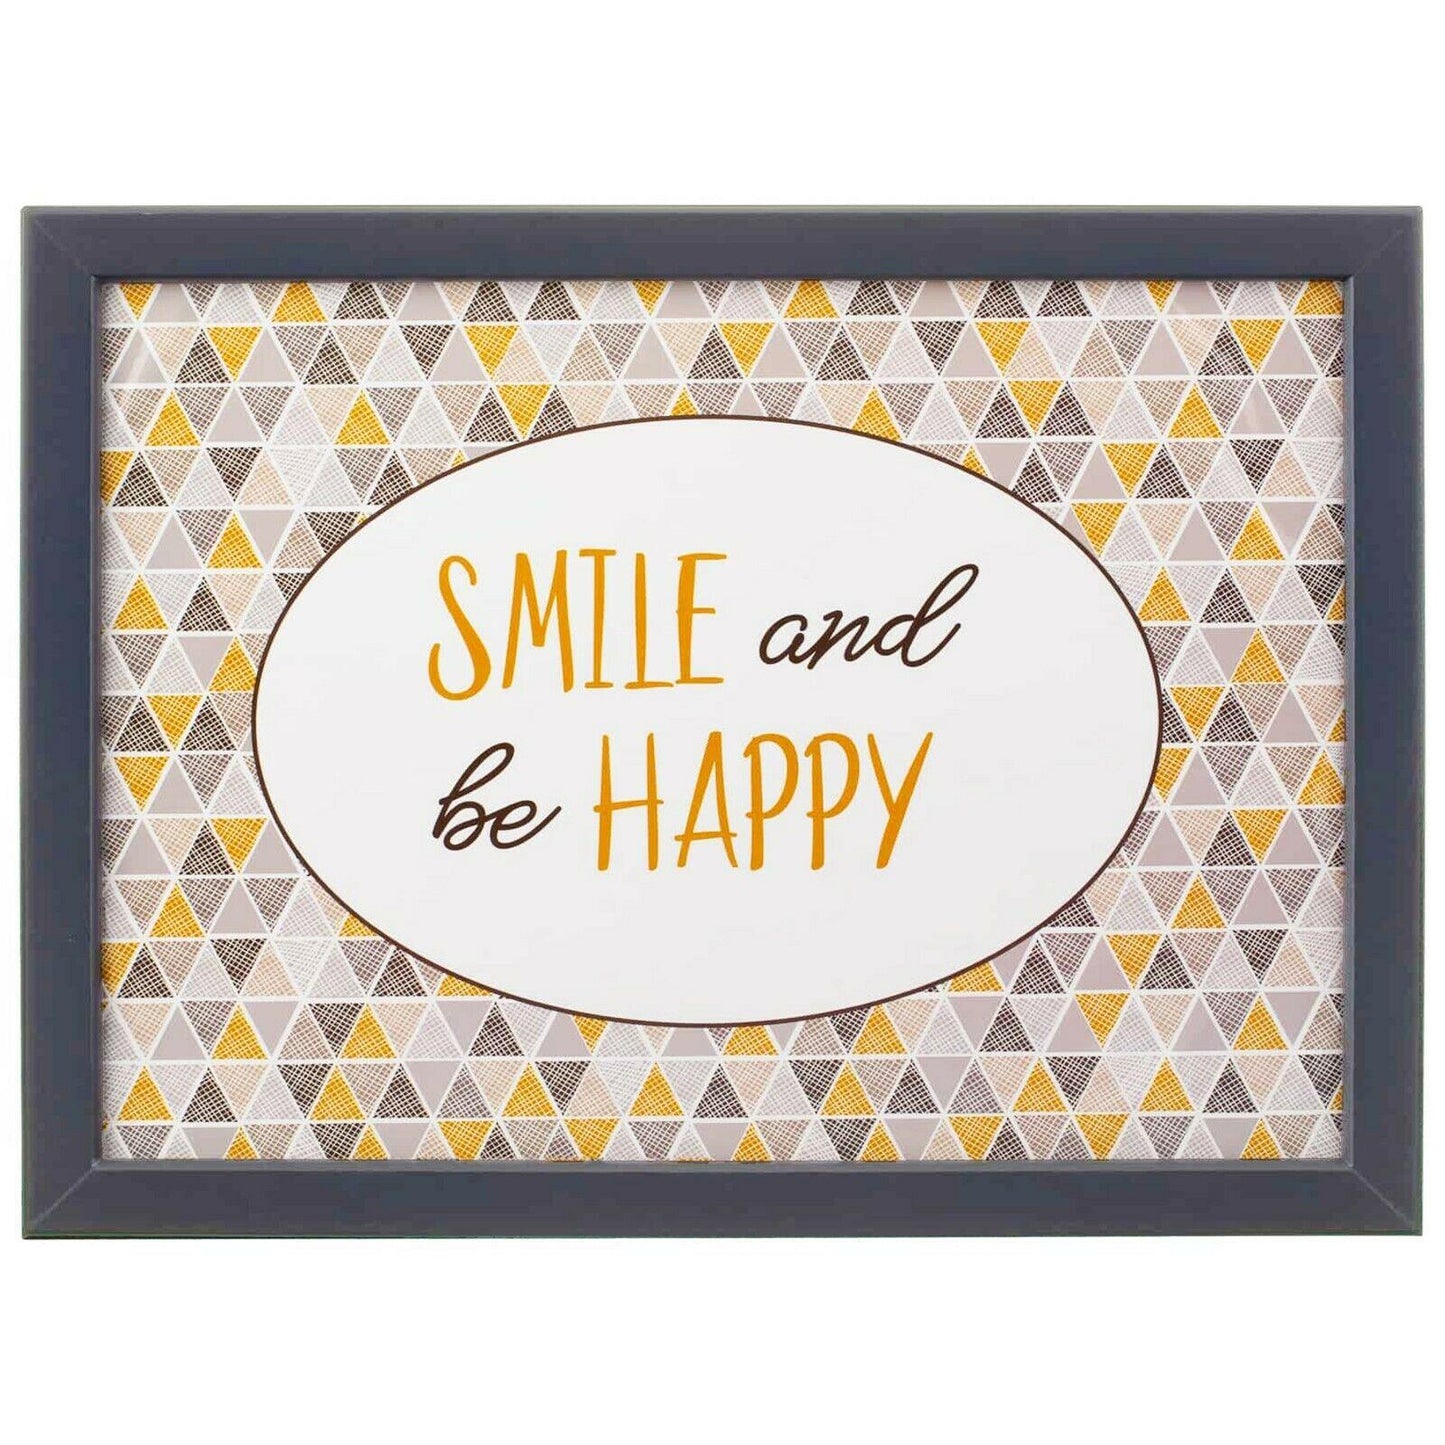 Smile and Be Happy Lap Tray With Bean Bag Cushion by Geezy - UKBuyZone